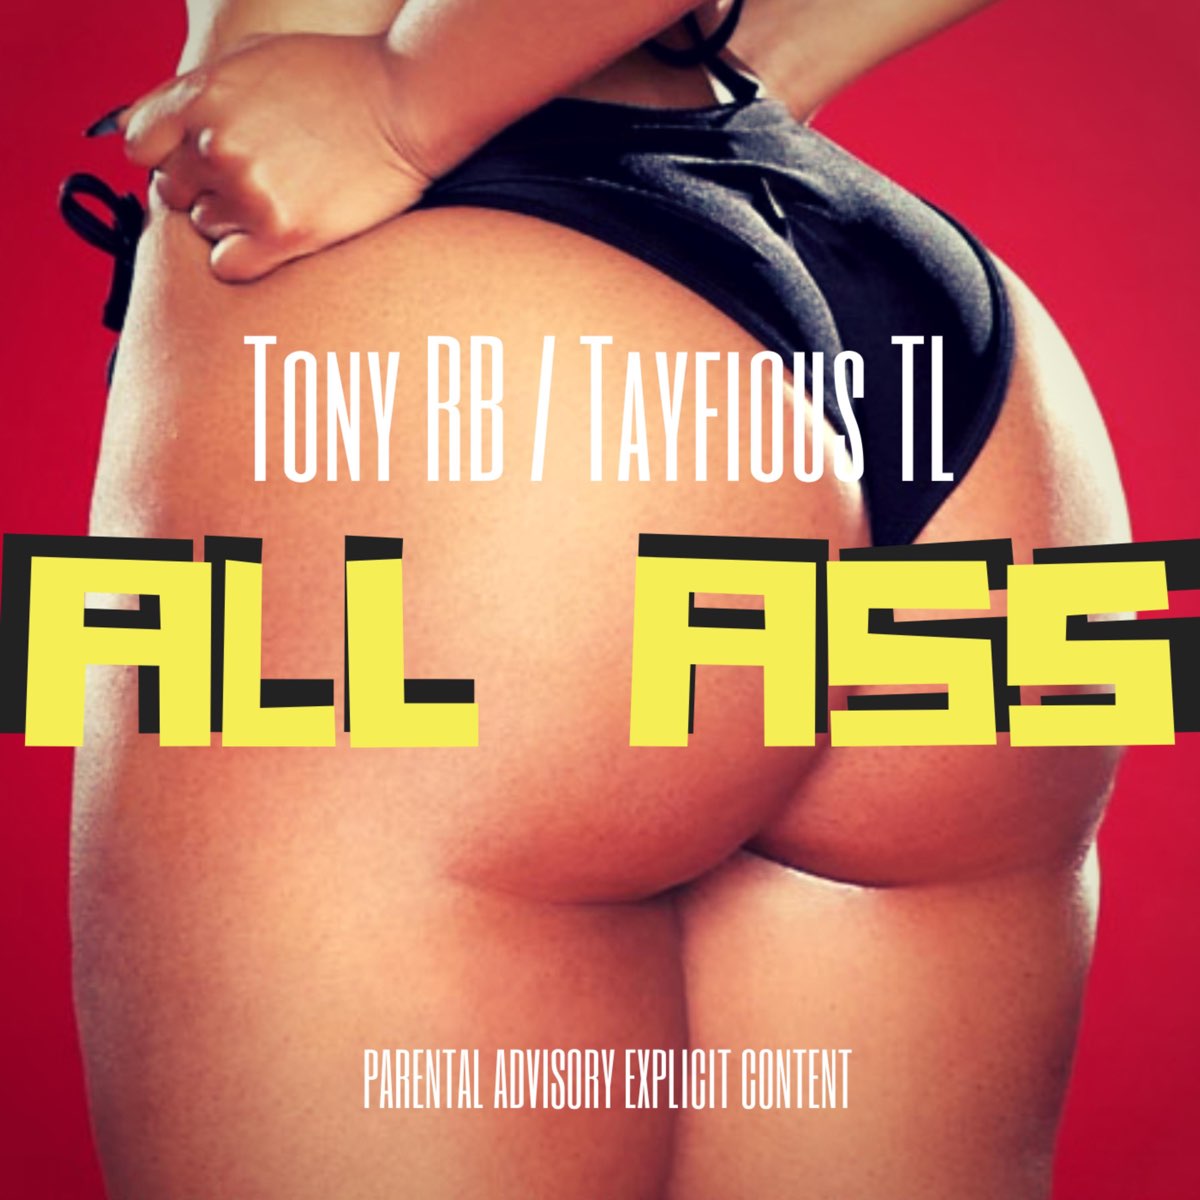 All Ass (feat. Tayfious Tha Loner) - Single by TonyRB on Apple Music